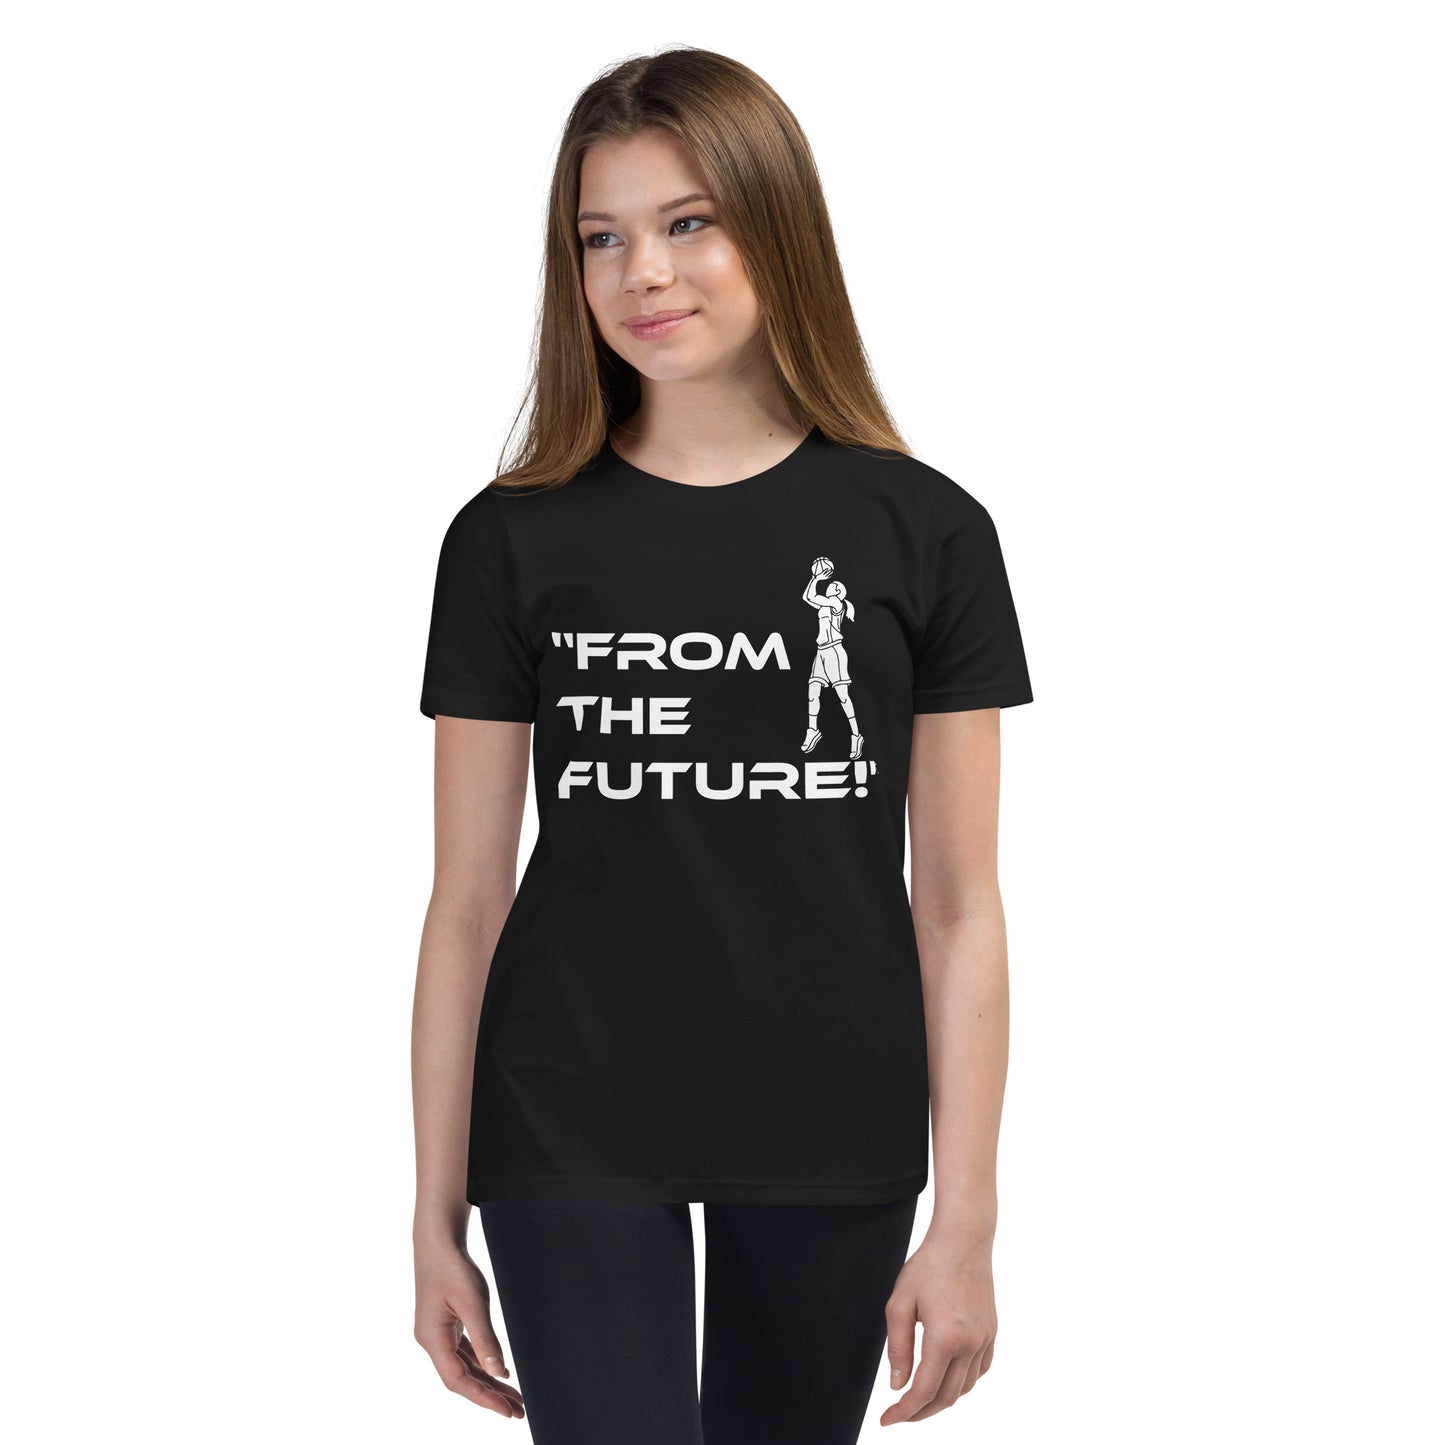 From the future Youth Short Sleeve T-Shirt-Stylish and Soft Everyday Tee